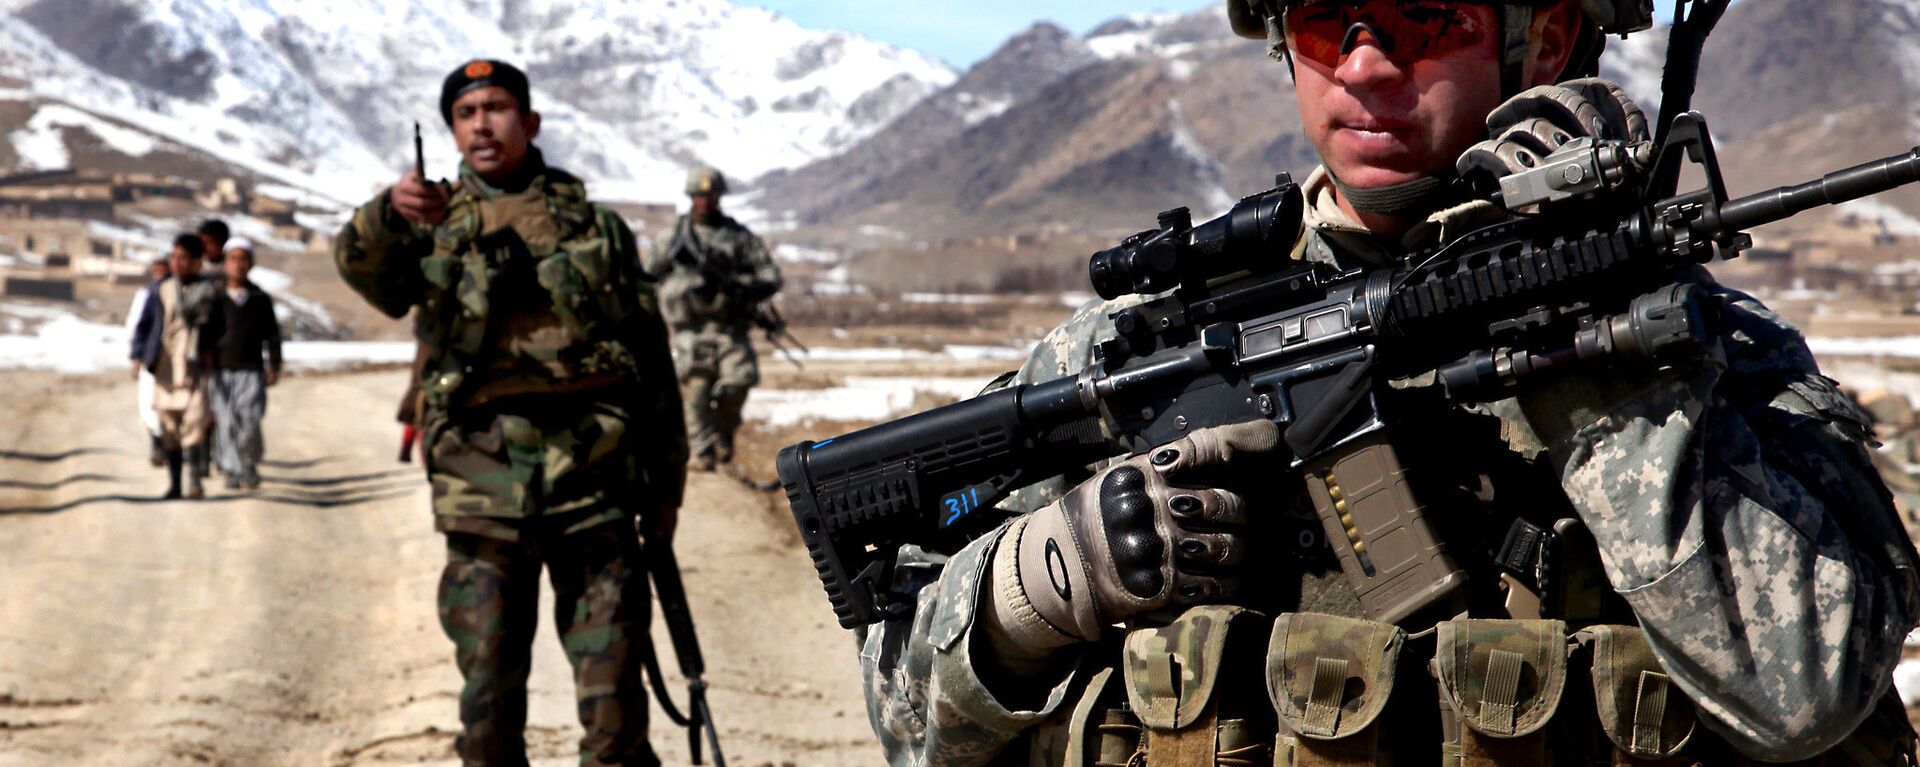 A U.S. Army Soldier patrols with Afghan soldiers to check on conditions in the village of Yawez in Wardak province, Afghanistan, Feb. 17, 2010 - Sputnik International, 1920, 15.04.2021